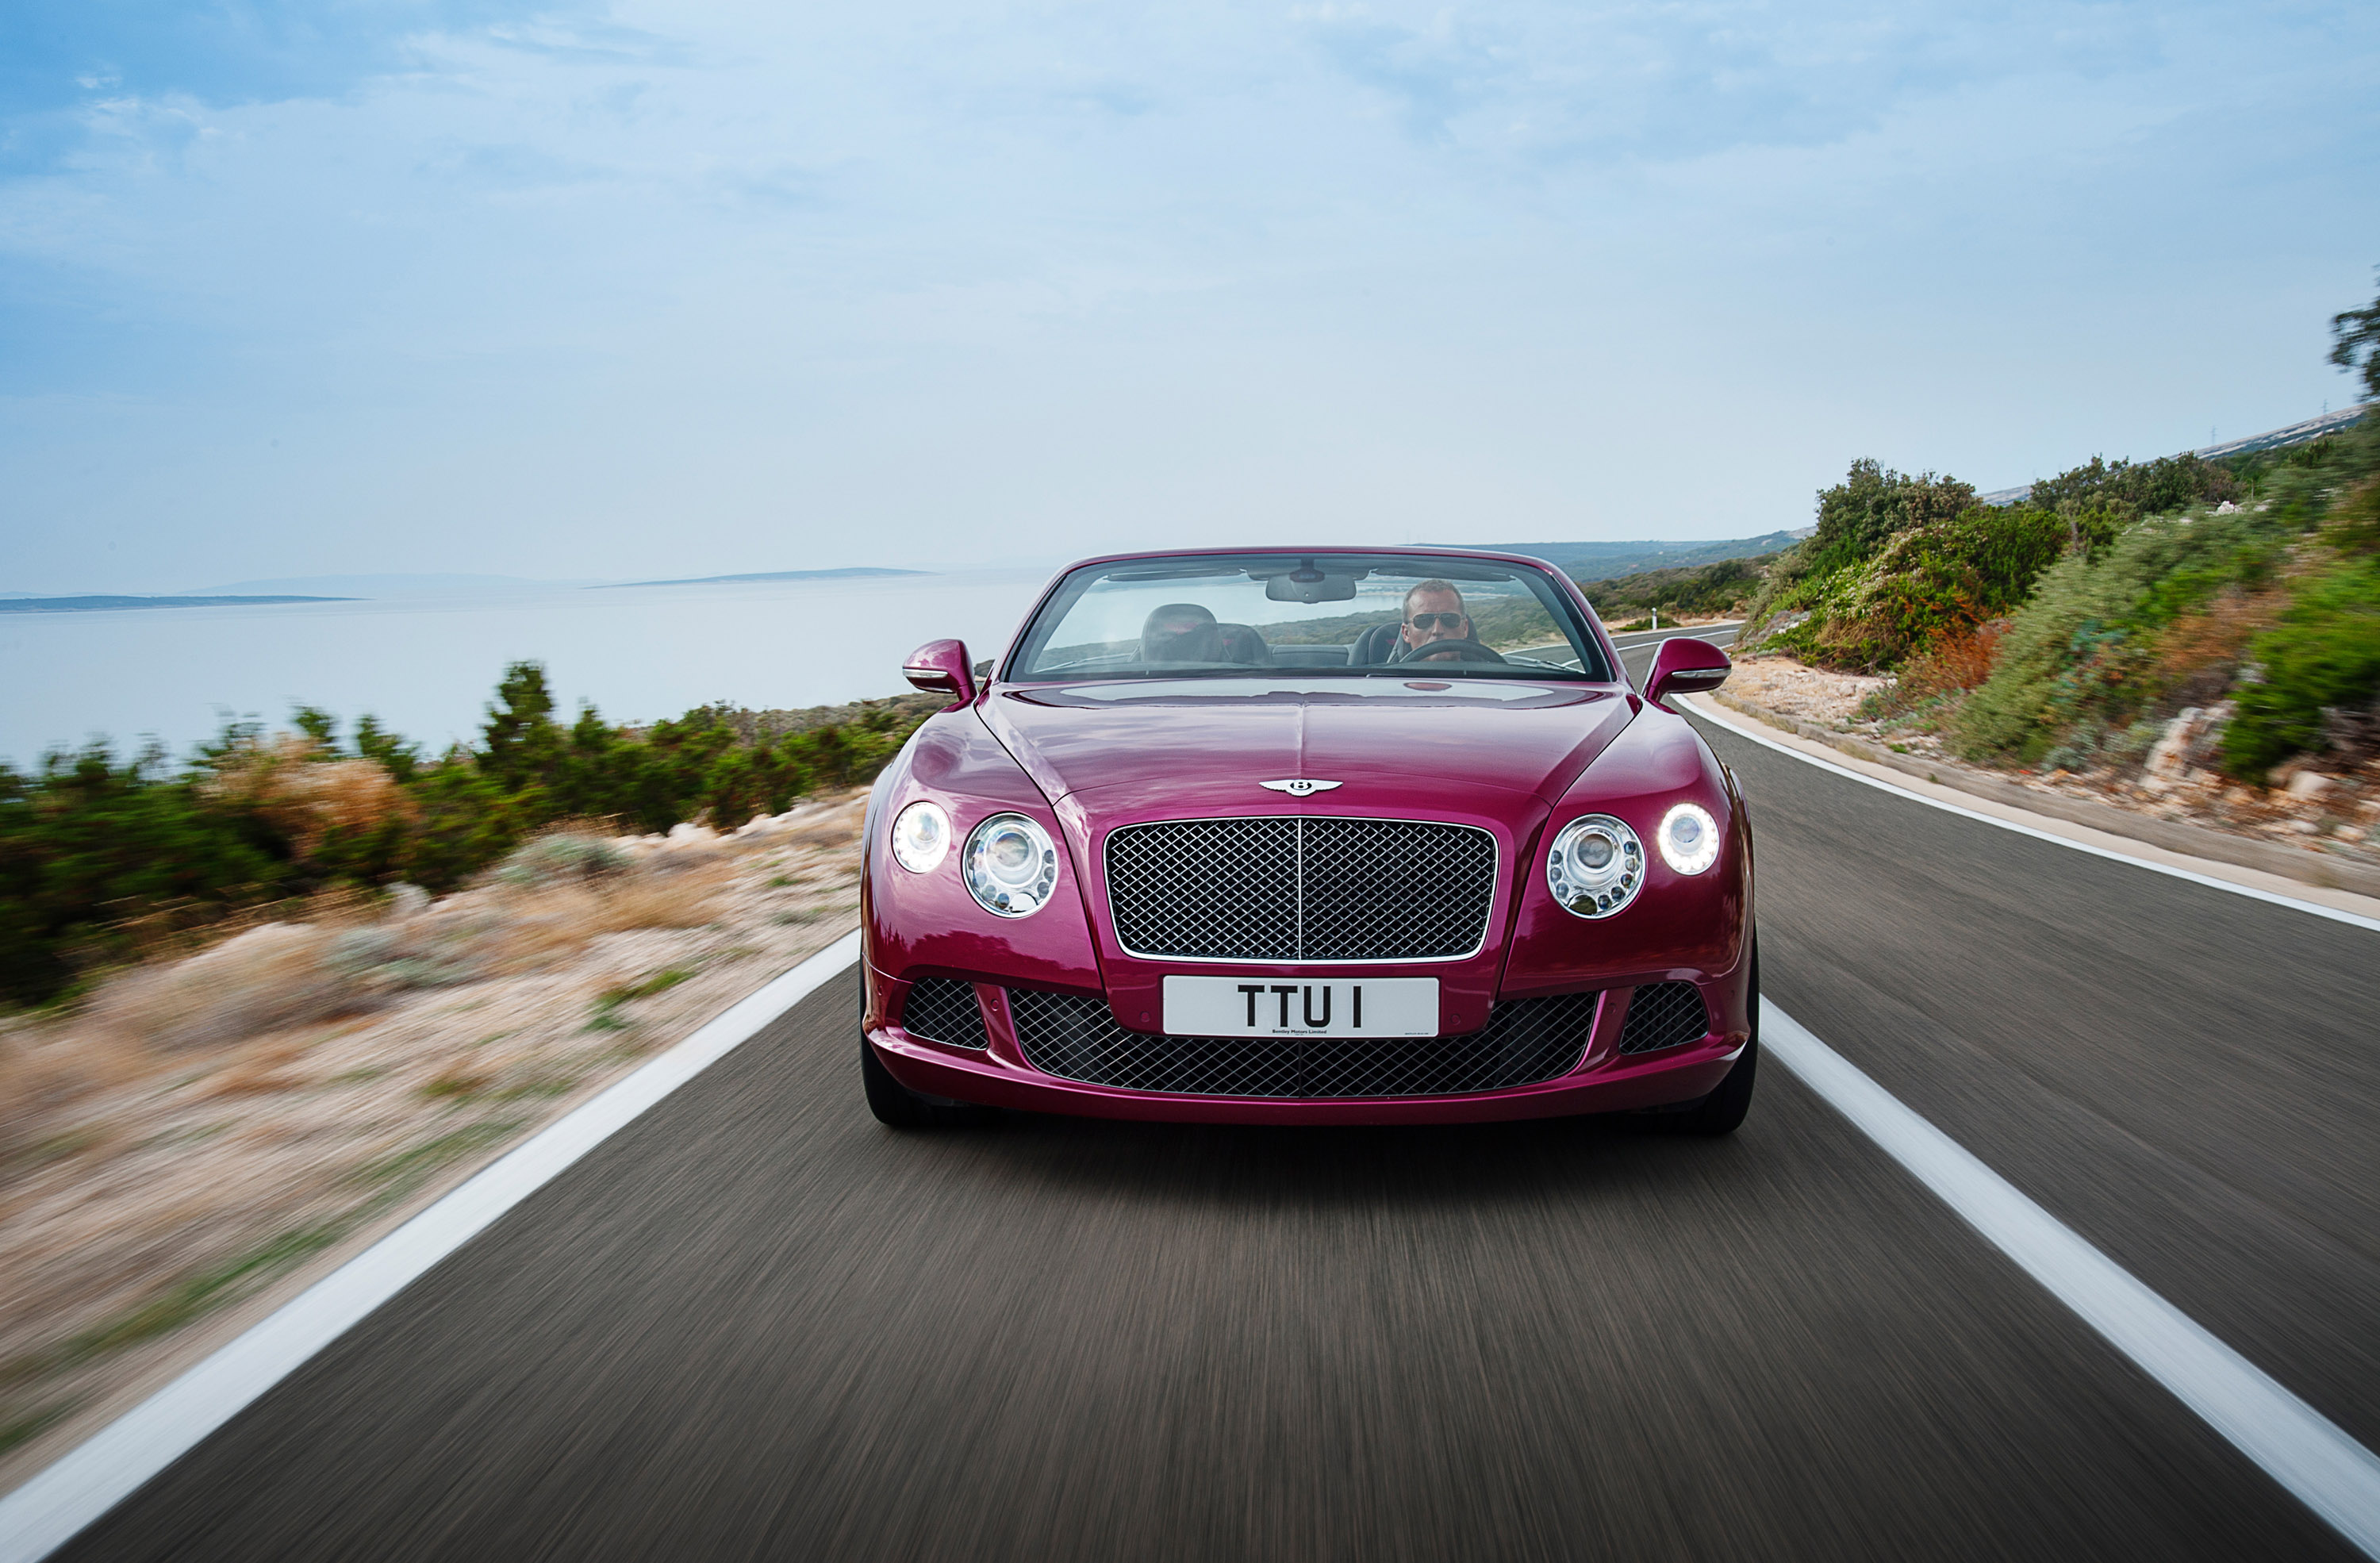 The Ultimate Luxury Driving Experience: The 2013 Bentley Continental GT Speed Convertible